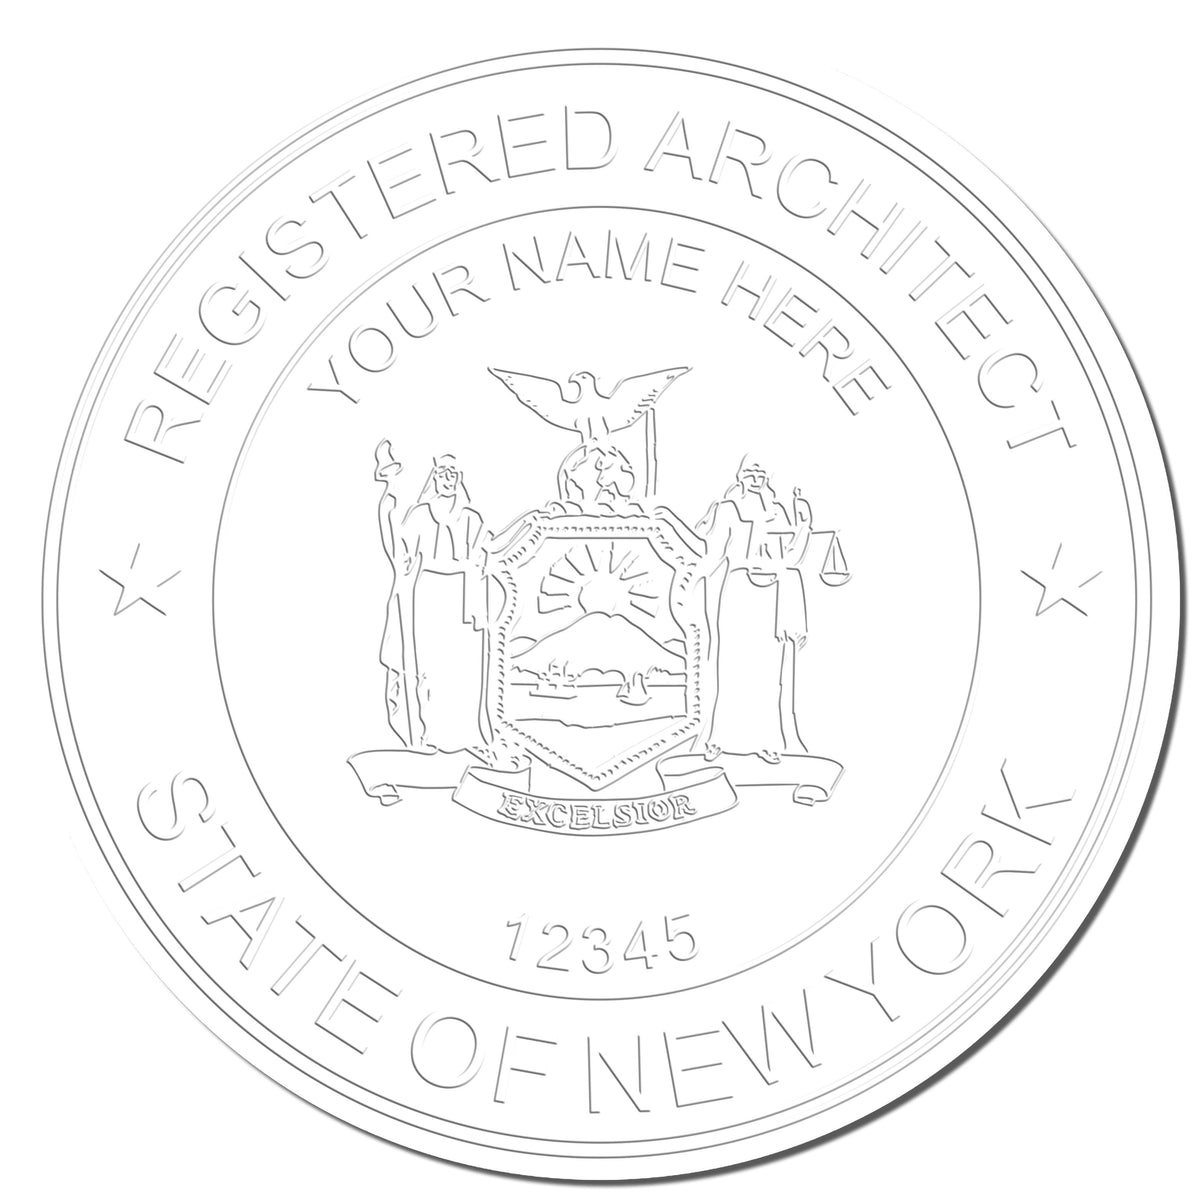 A photograph of the Handheld New York Architect Seal Embosser stamp impression reveals a vivid, professional image of the on paper.